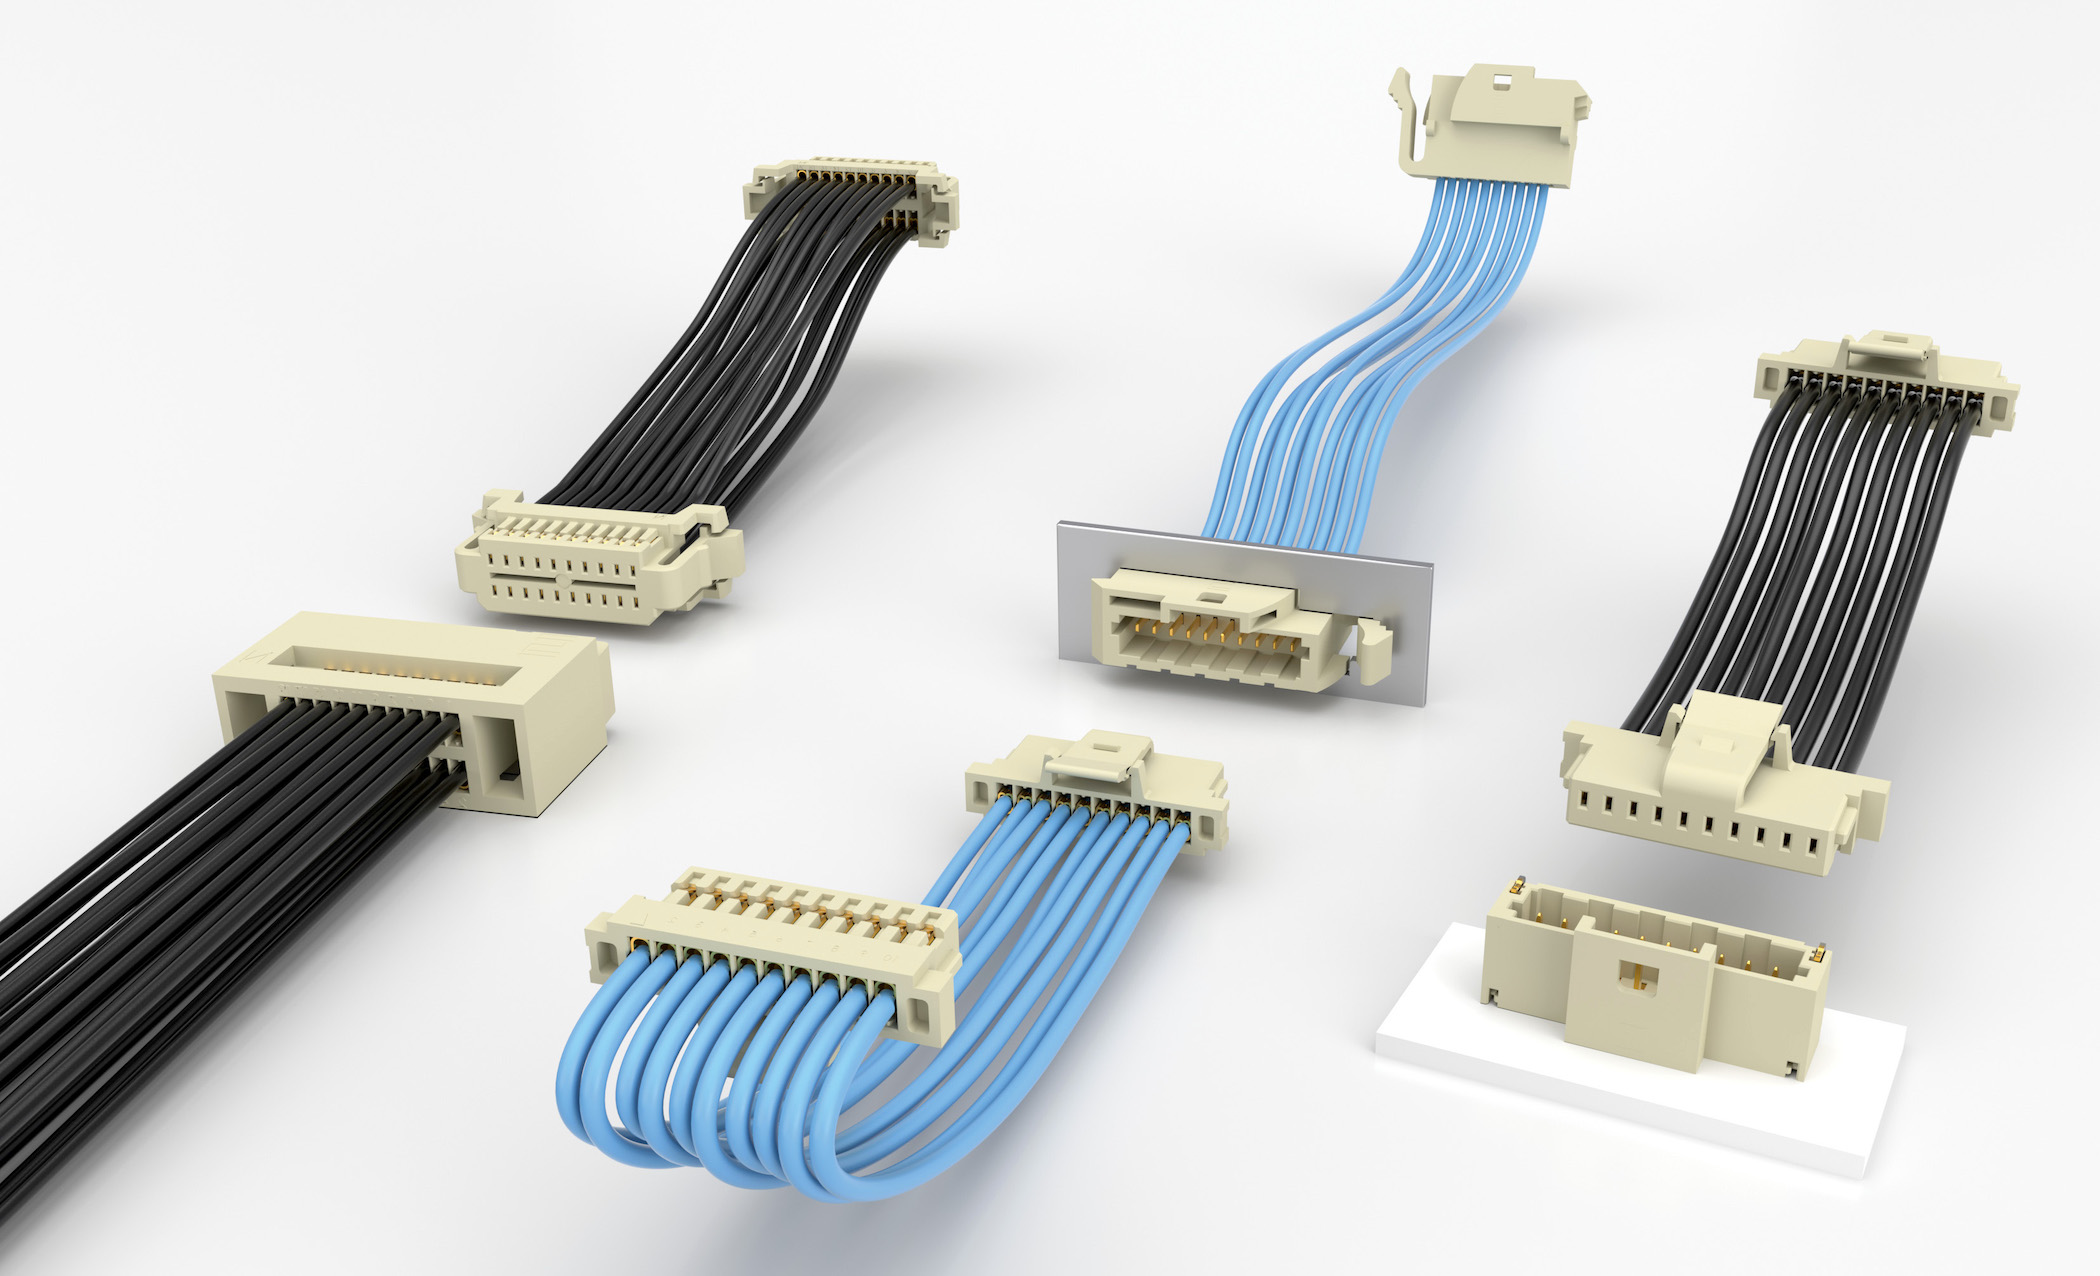 cables from Samtec Micro-Mate series